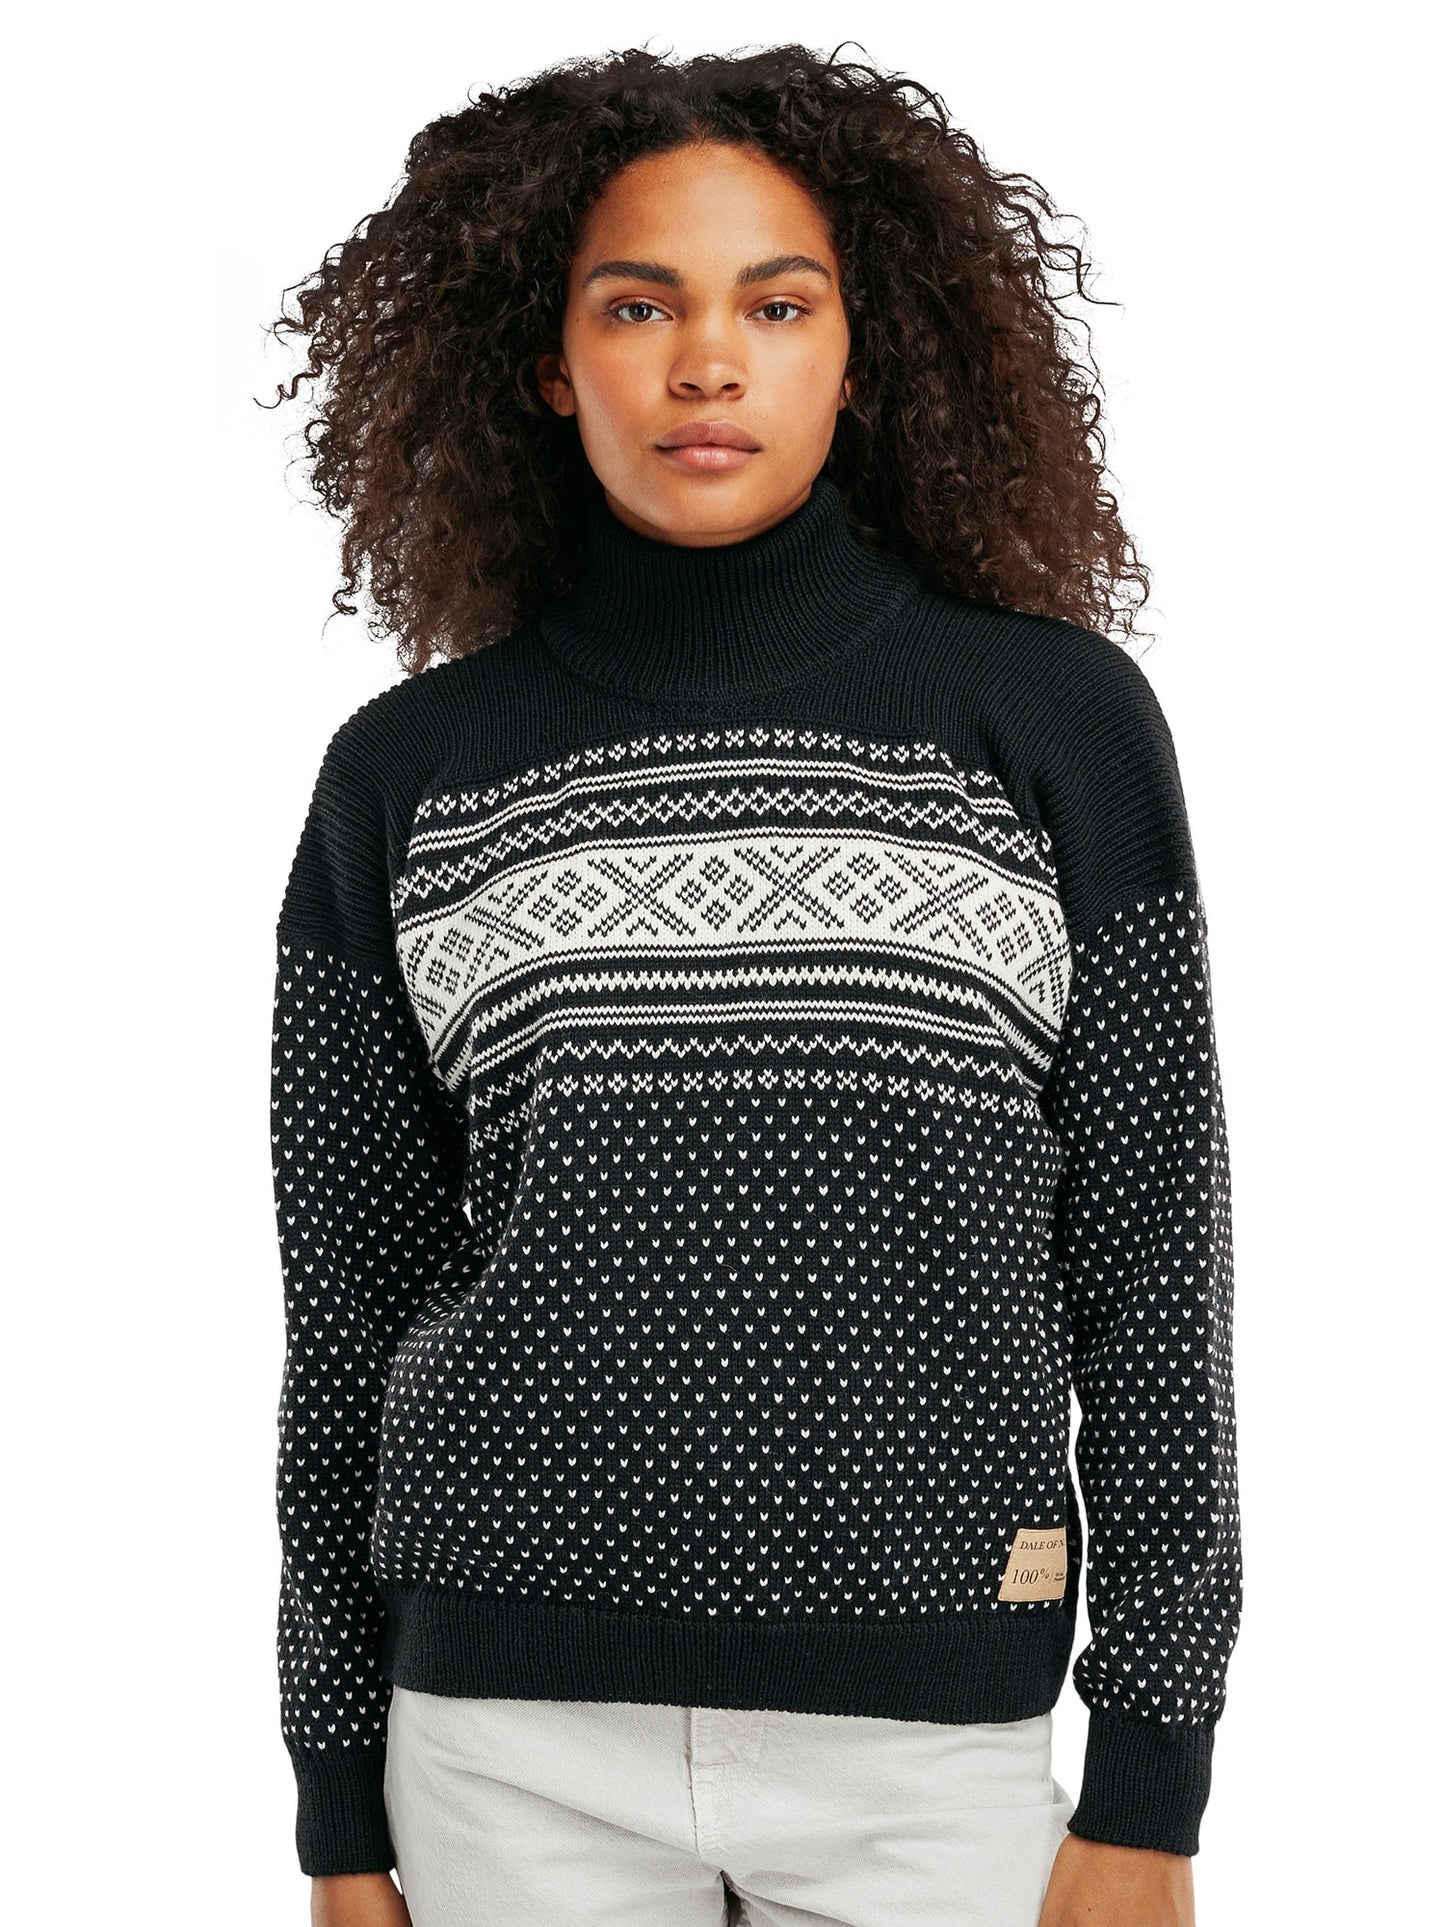 Dale of Norway - Valløy Sweater - Black offwhite (D)